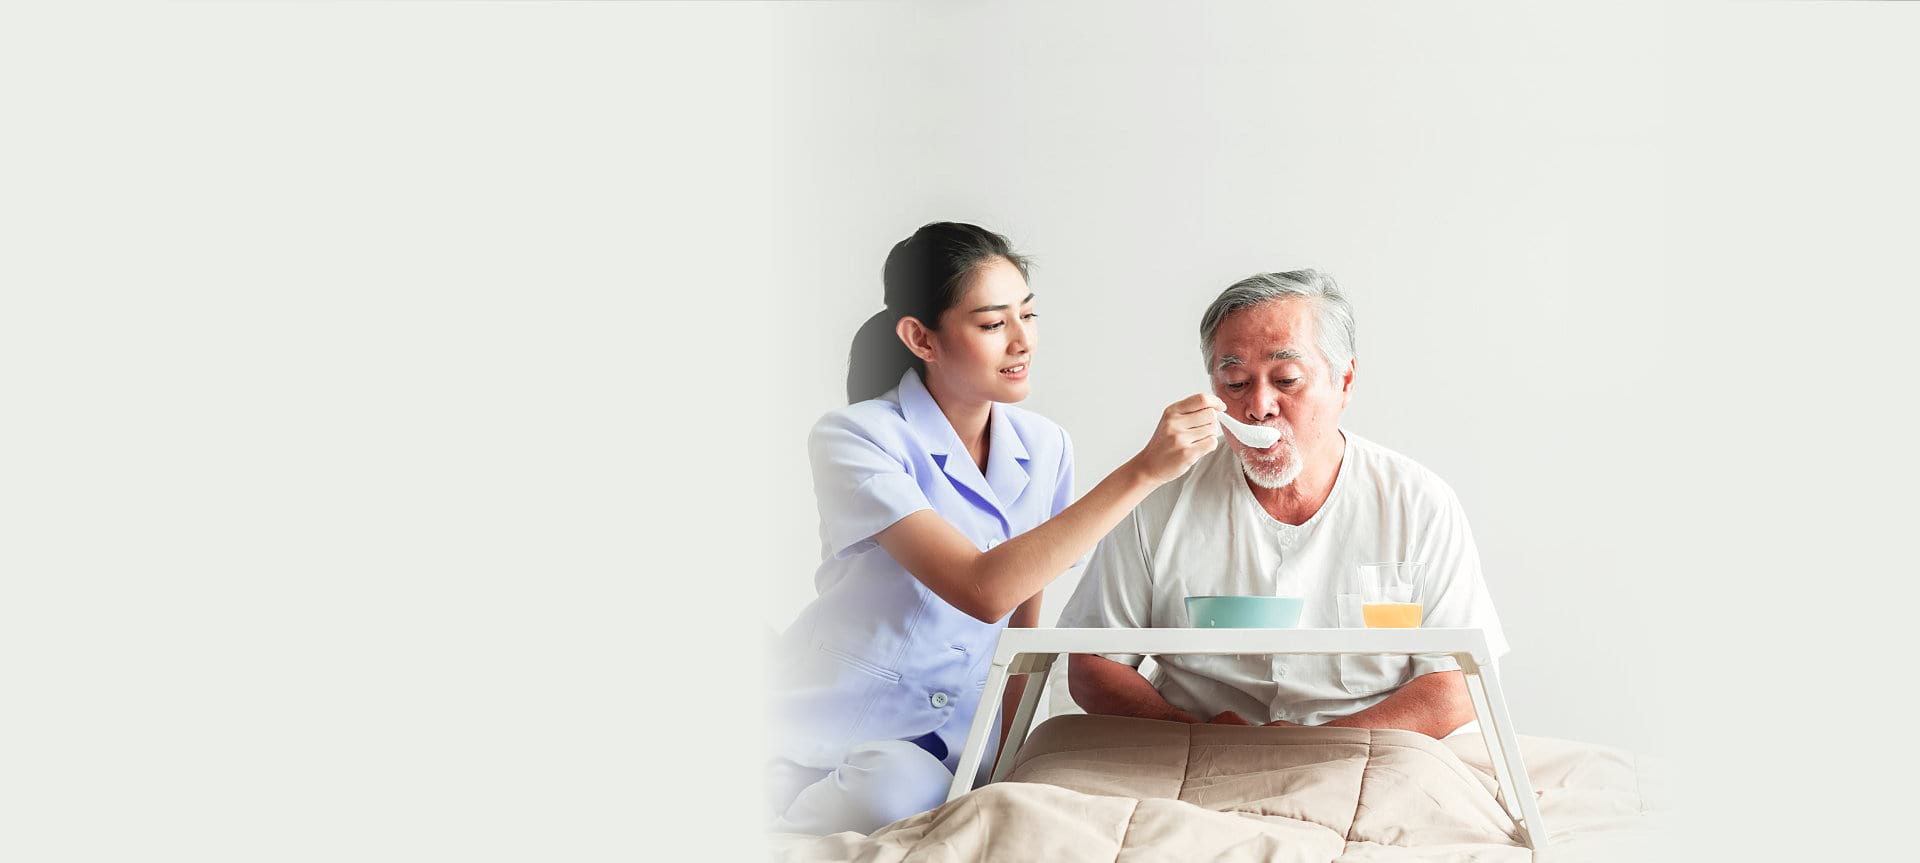 caregiver helping patient to eat